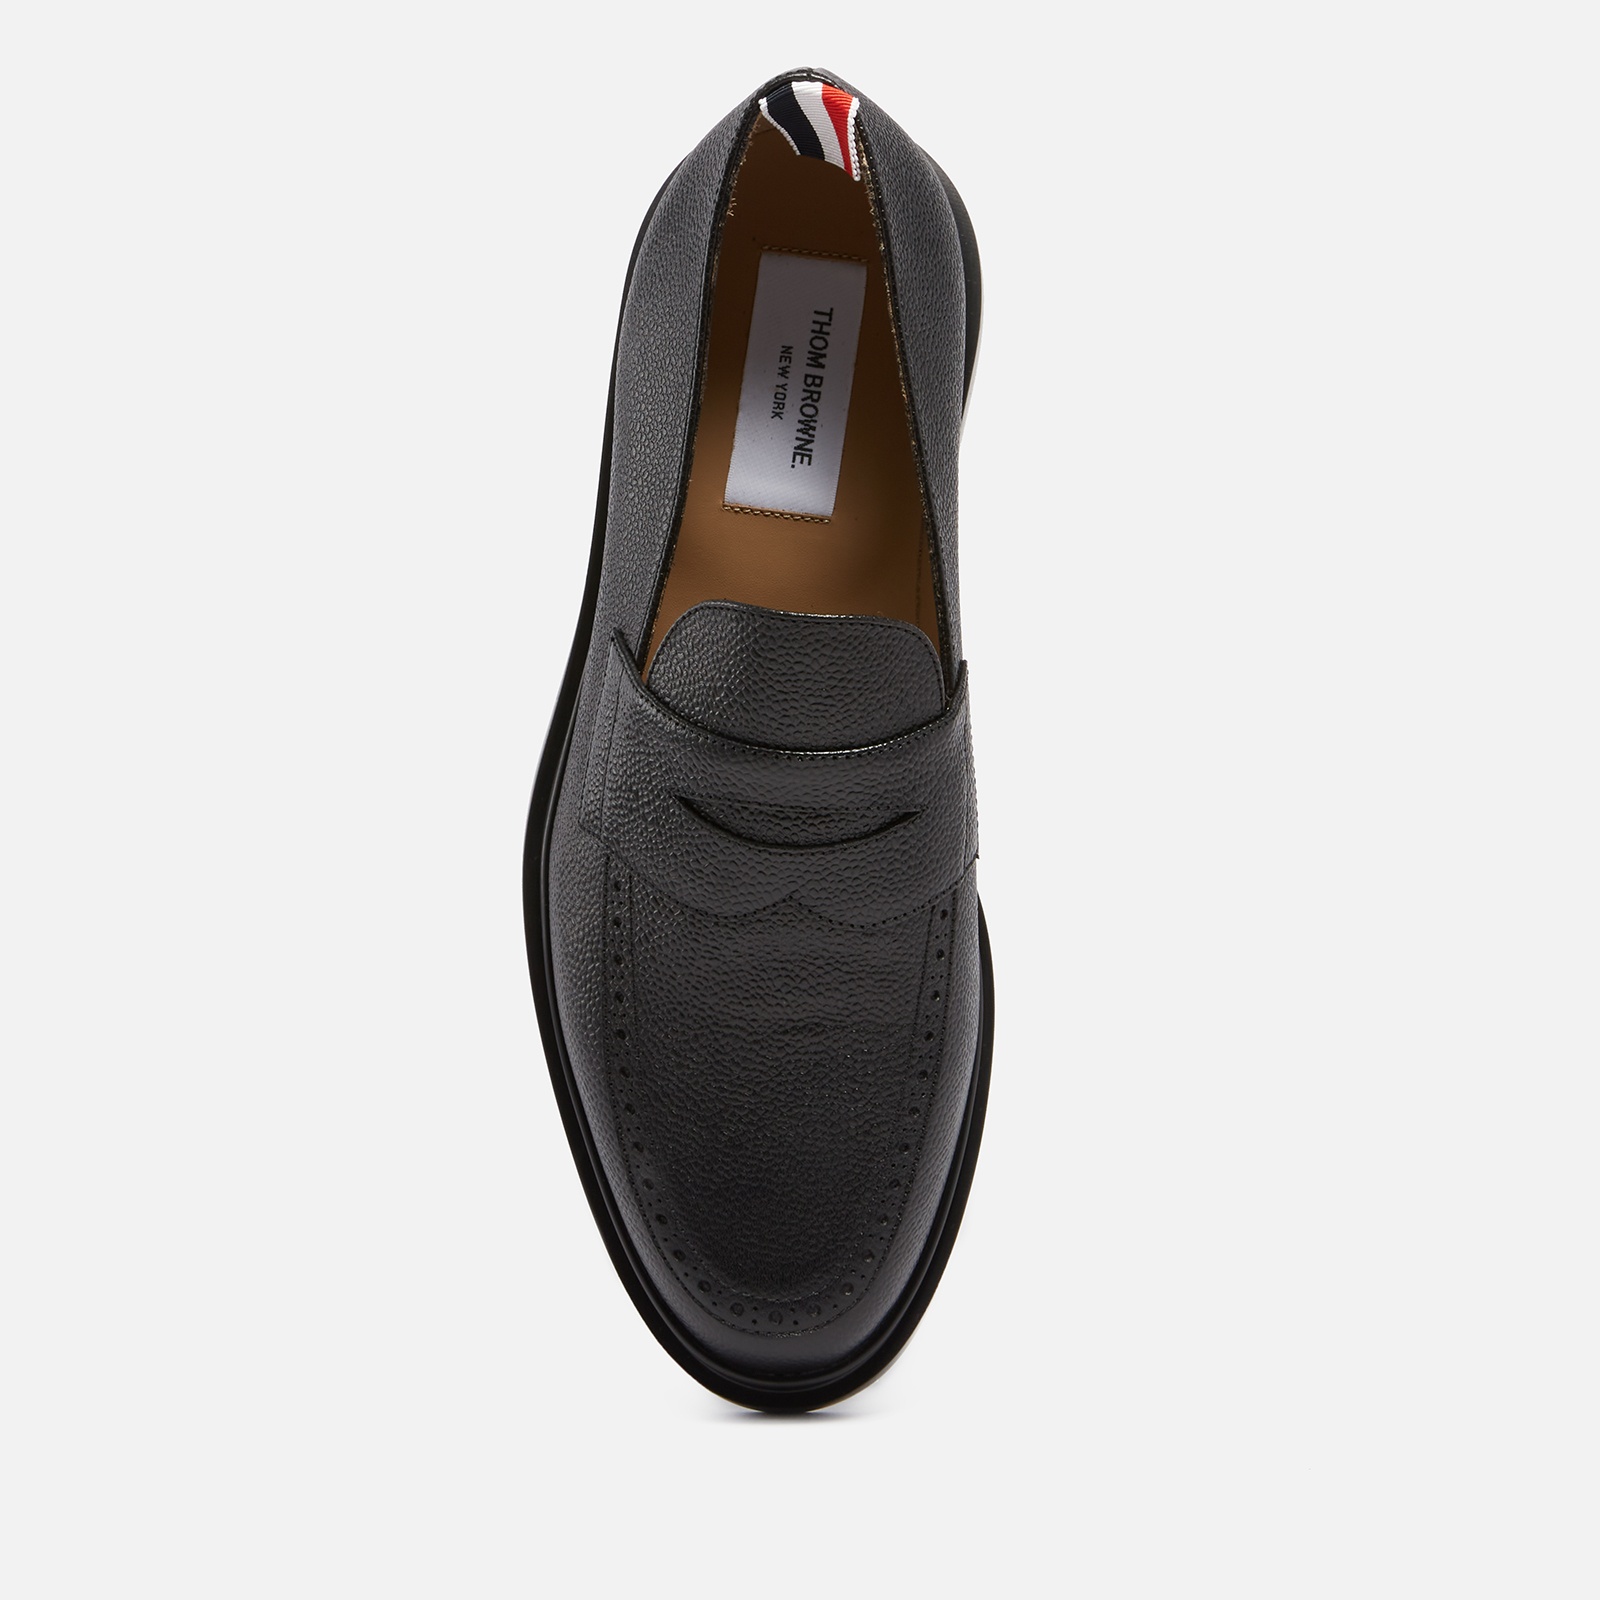 Thom Browne Men's Penny Loafers - Black - 3